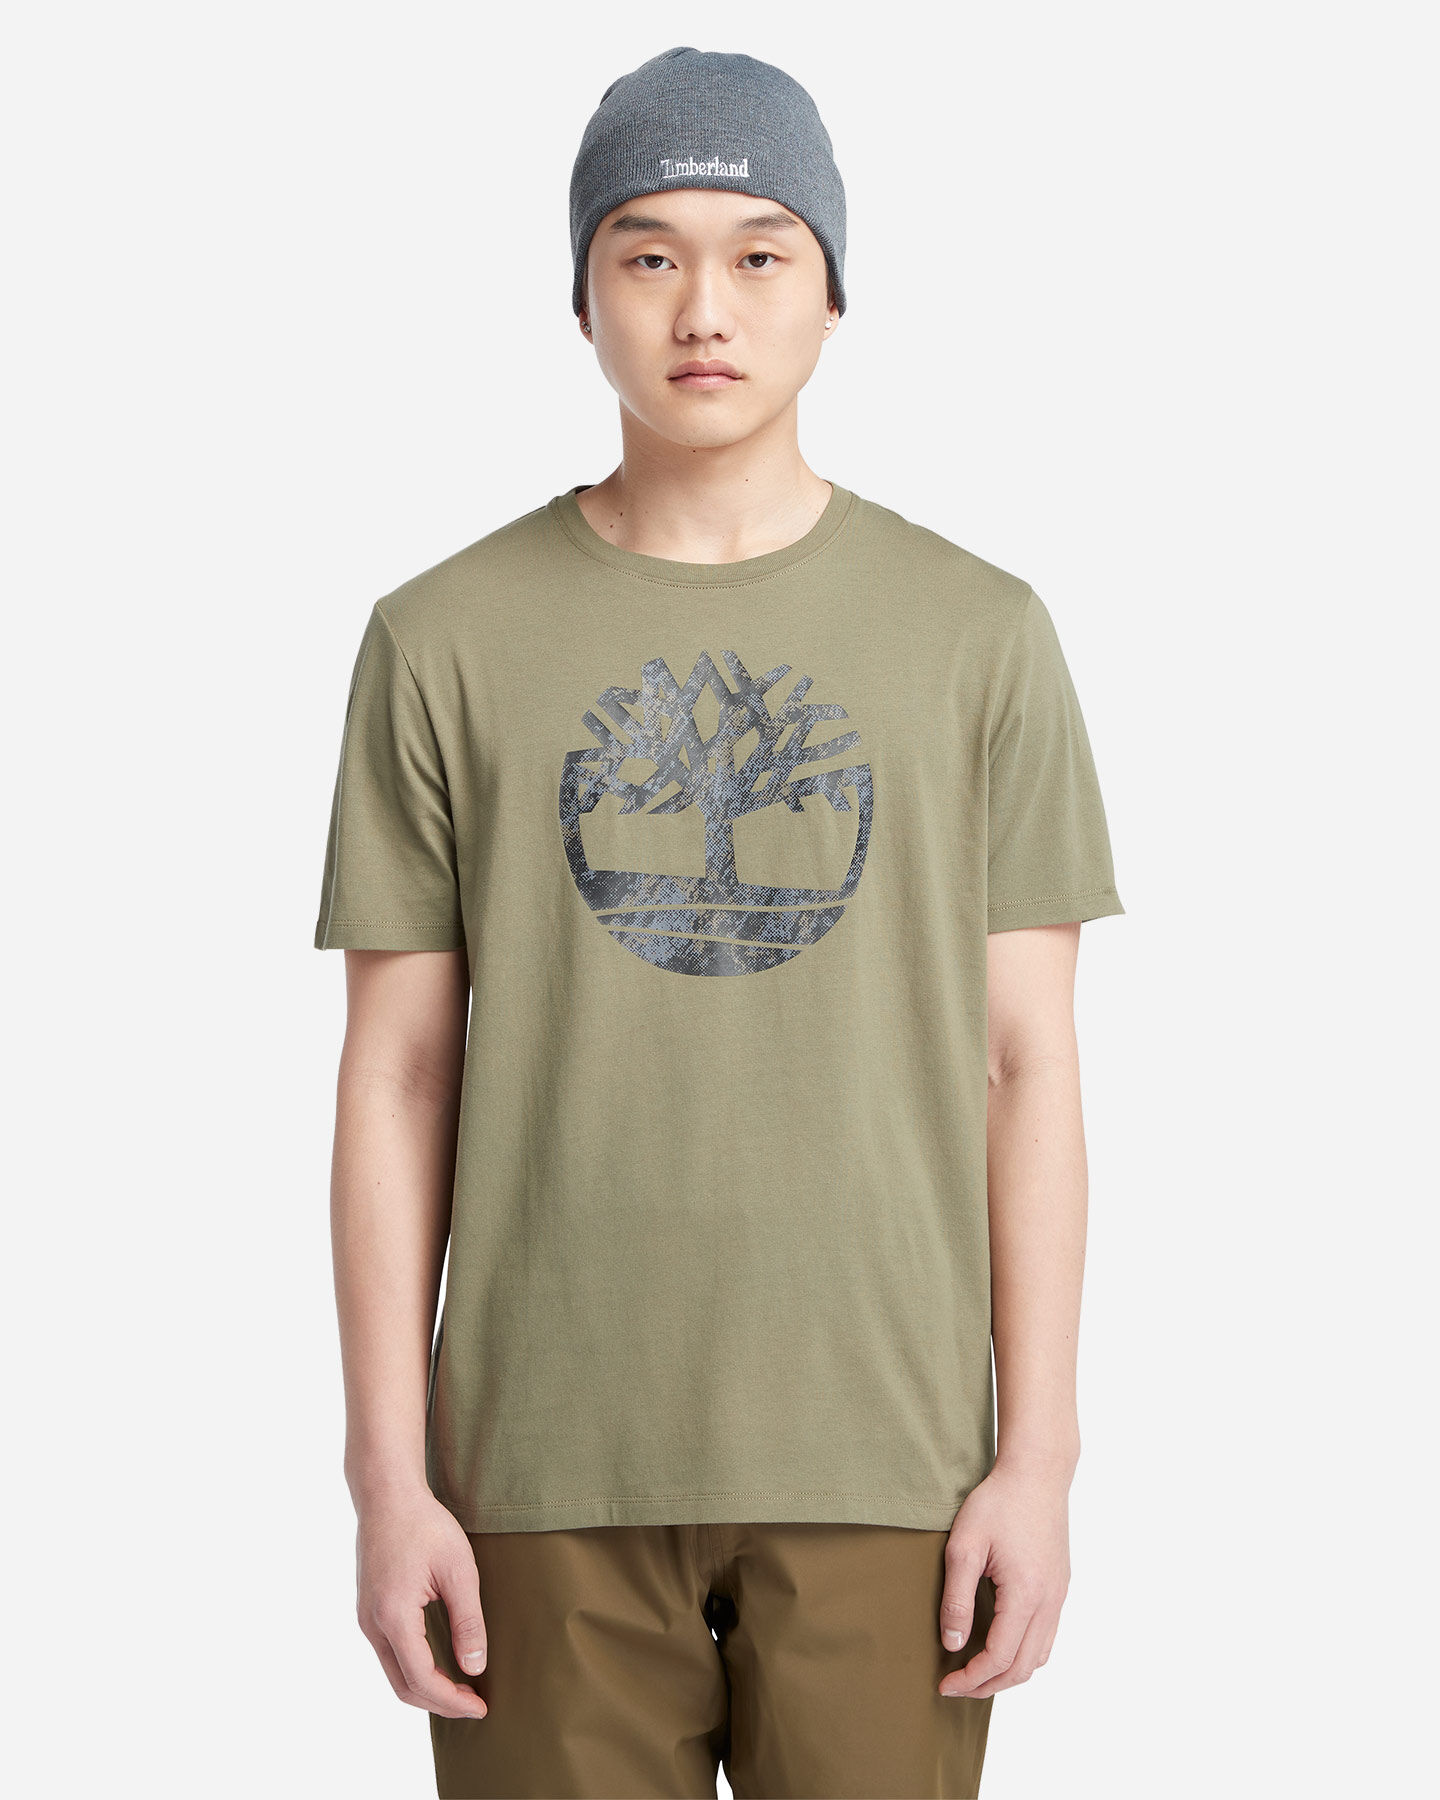  T-Shirt TIMBERLAND CAMO TREE M S4127278|5901|S scatto 1